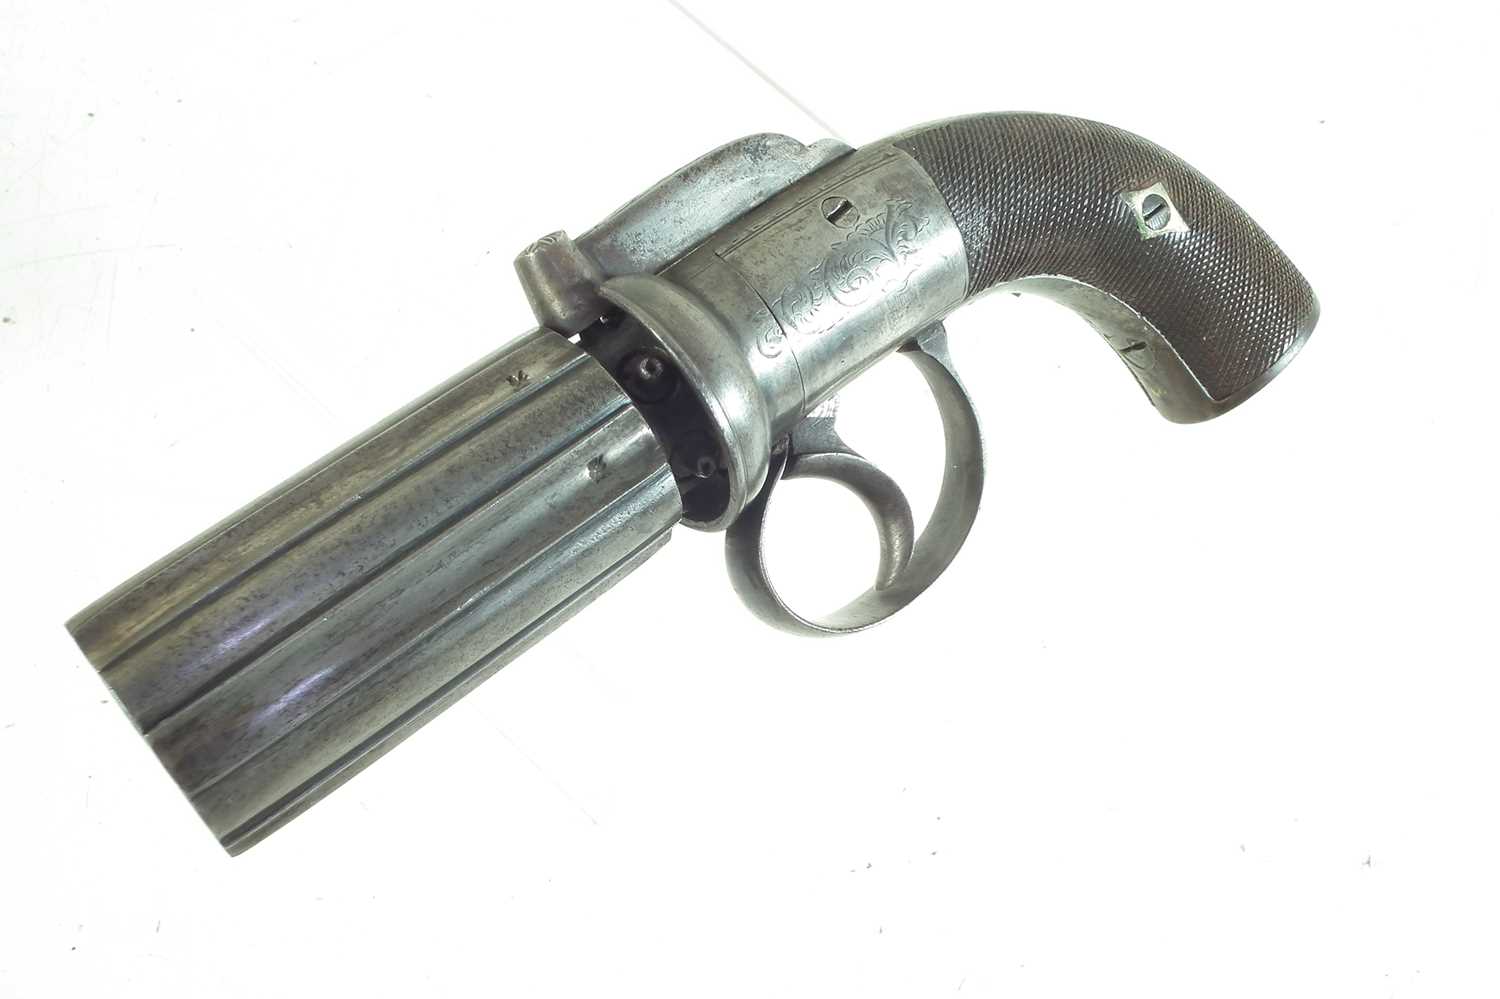 Percussion pepperpot pistol - Image 5 of 6